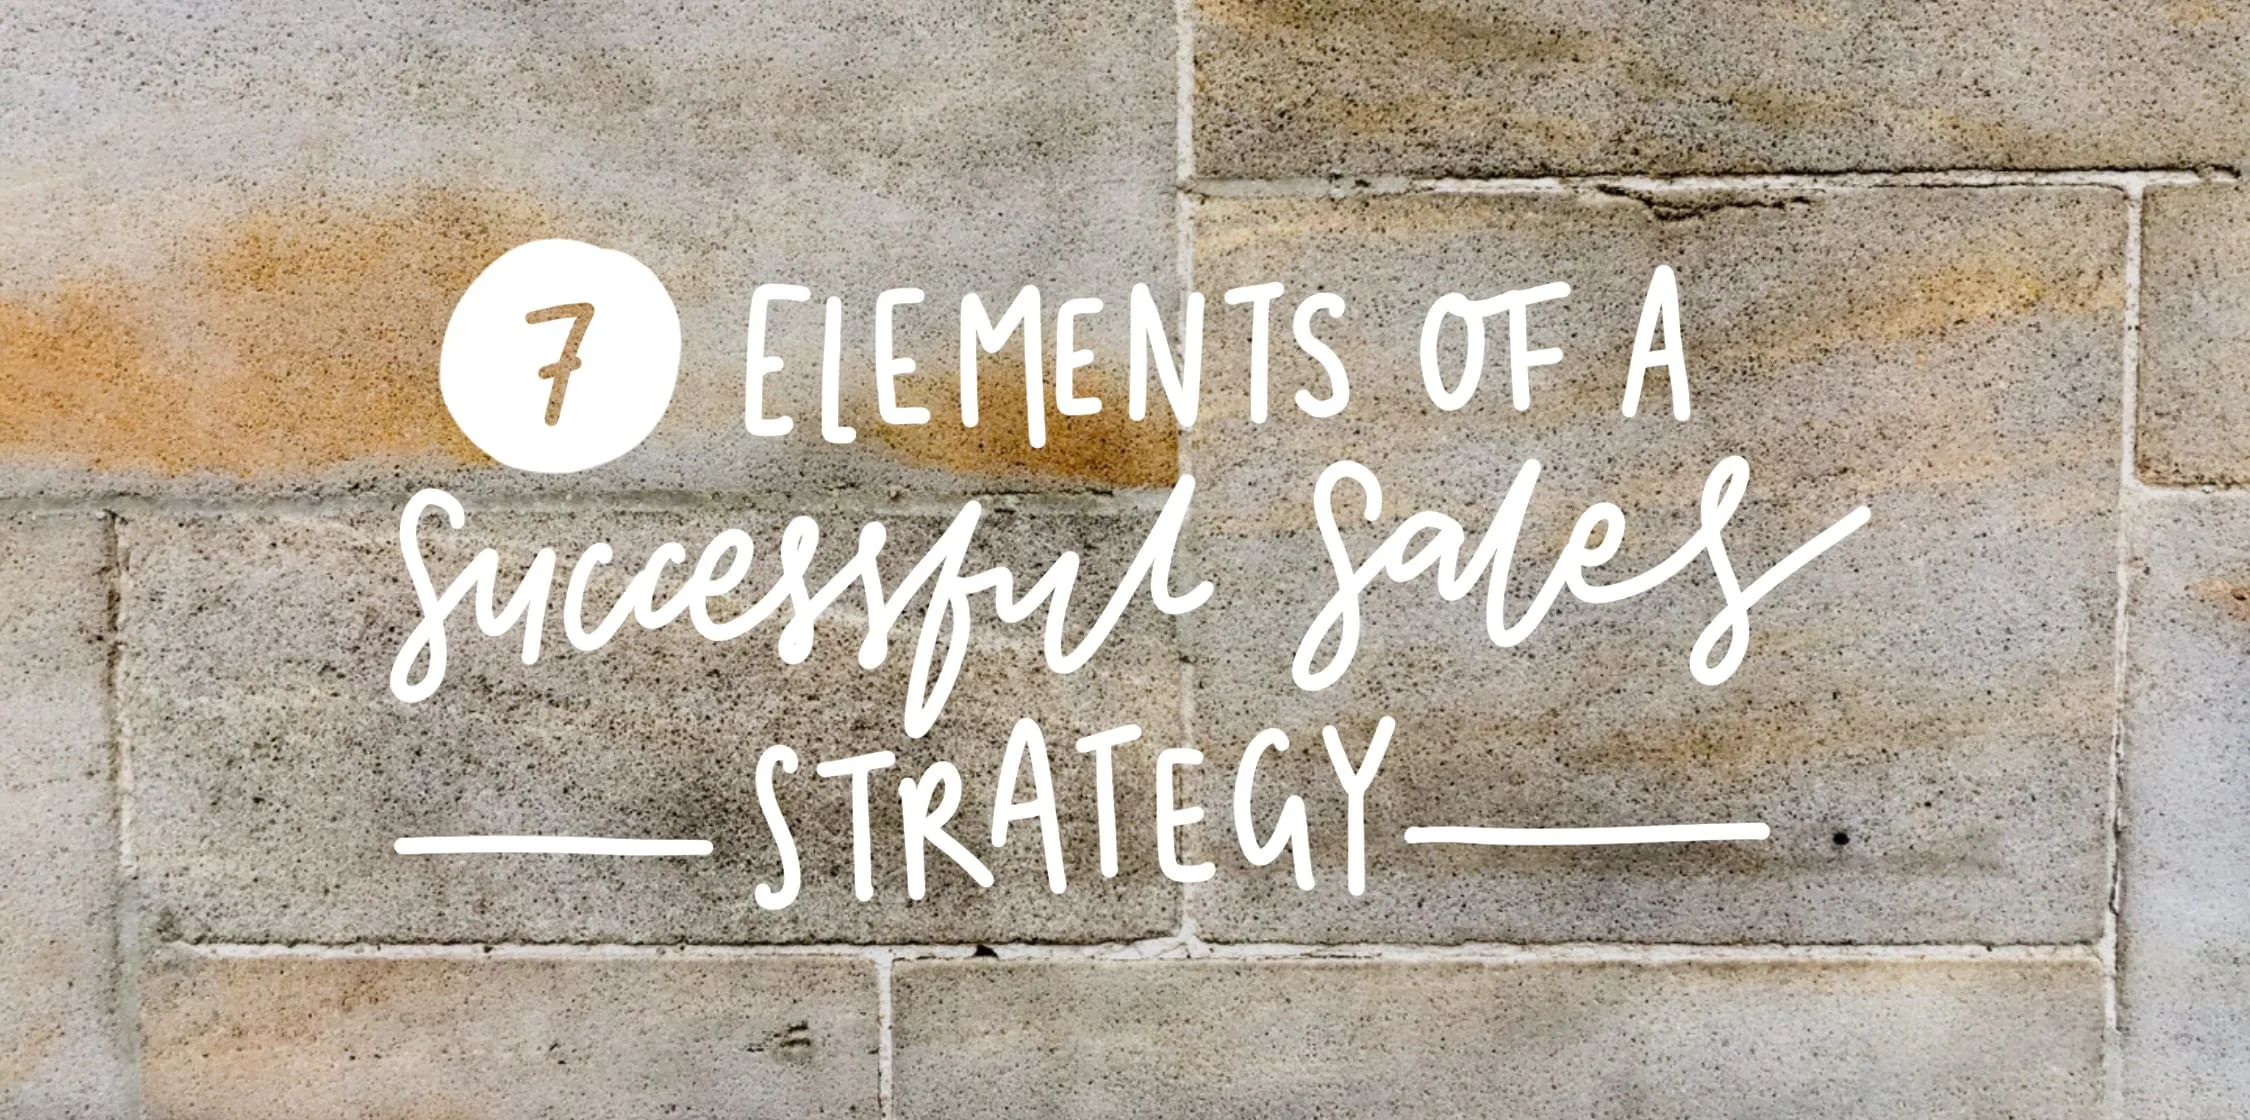 7 elements of a successful sales strategy